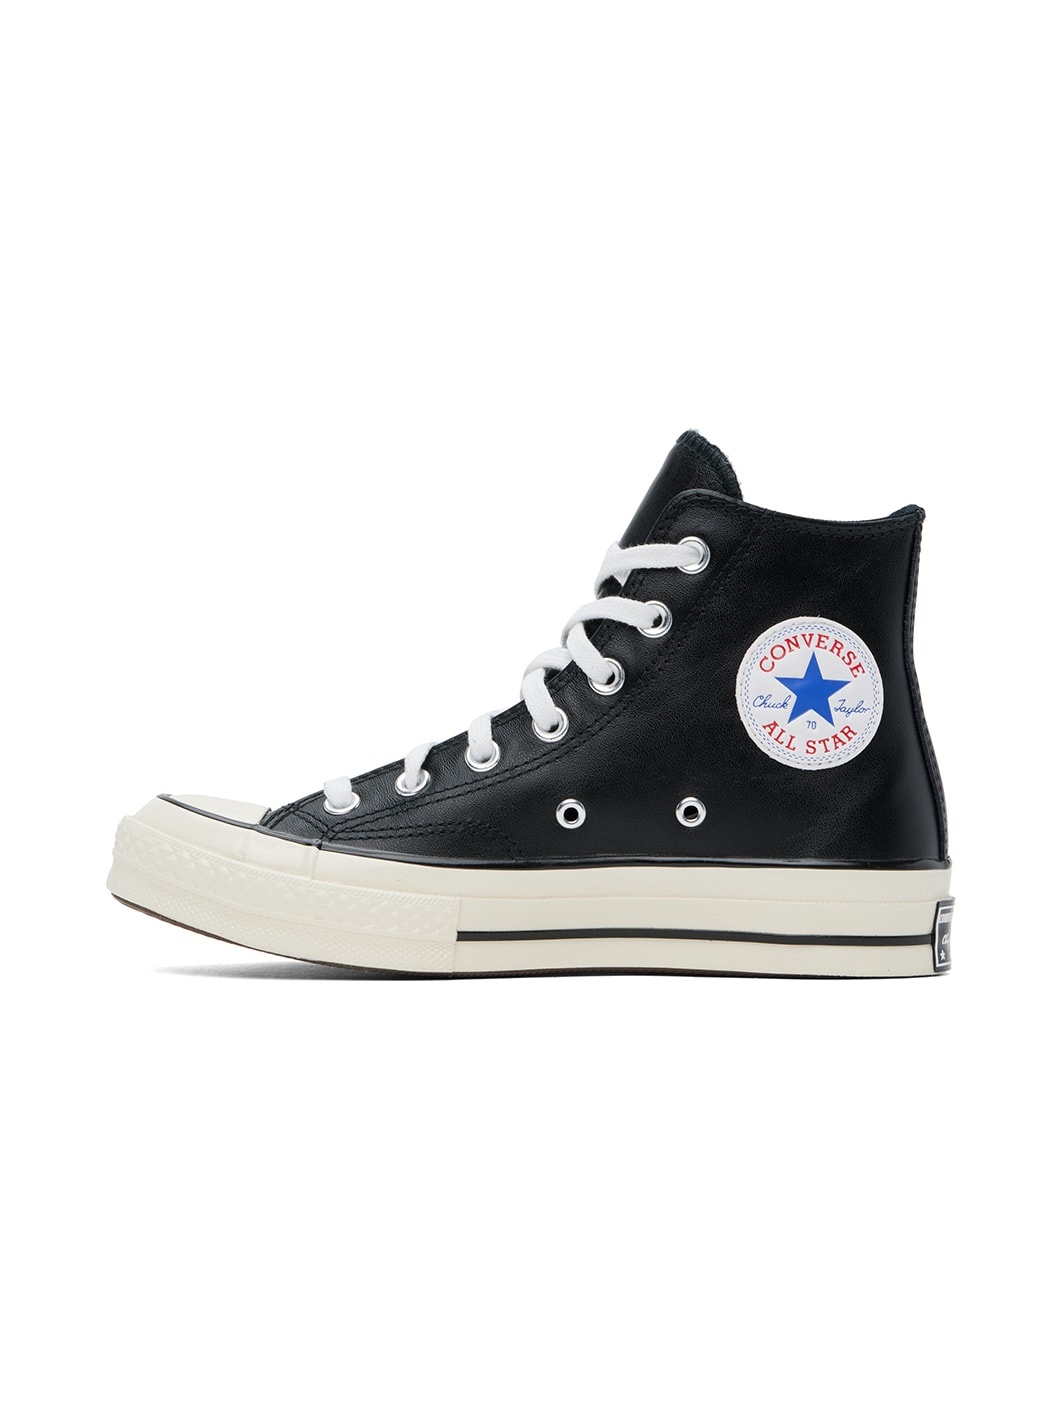 Black Chuck 70 Leather High Top Sneakers - 3